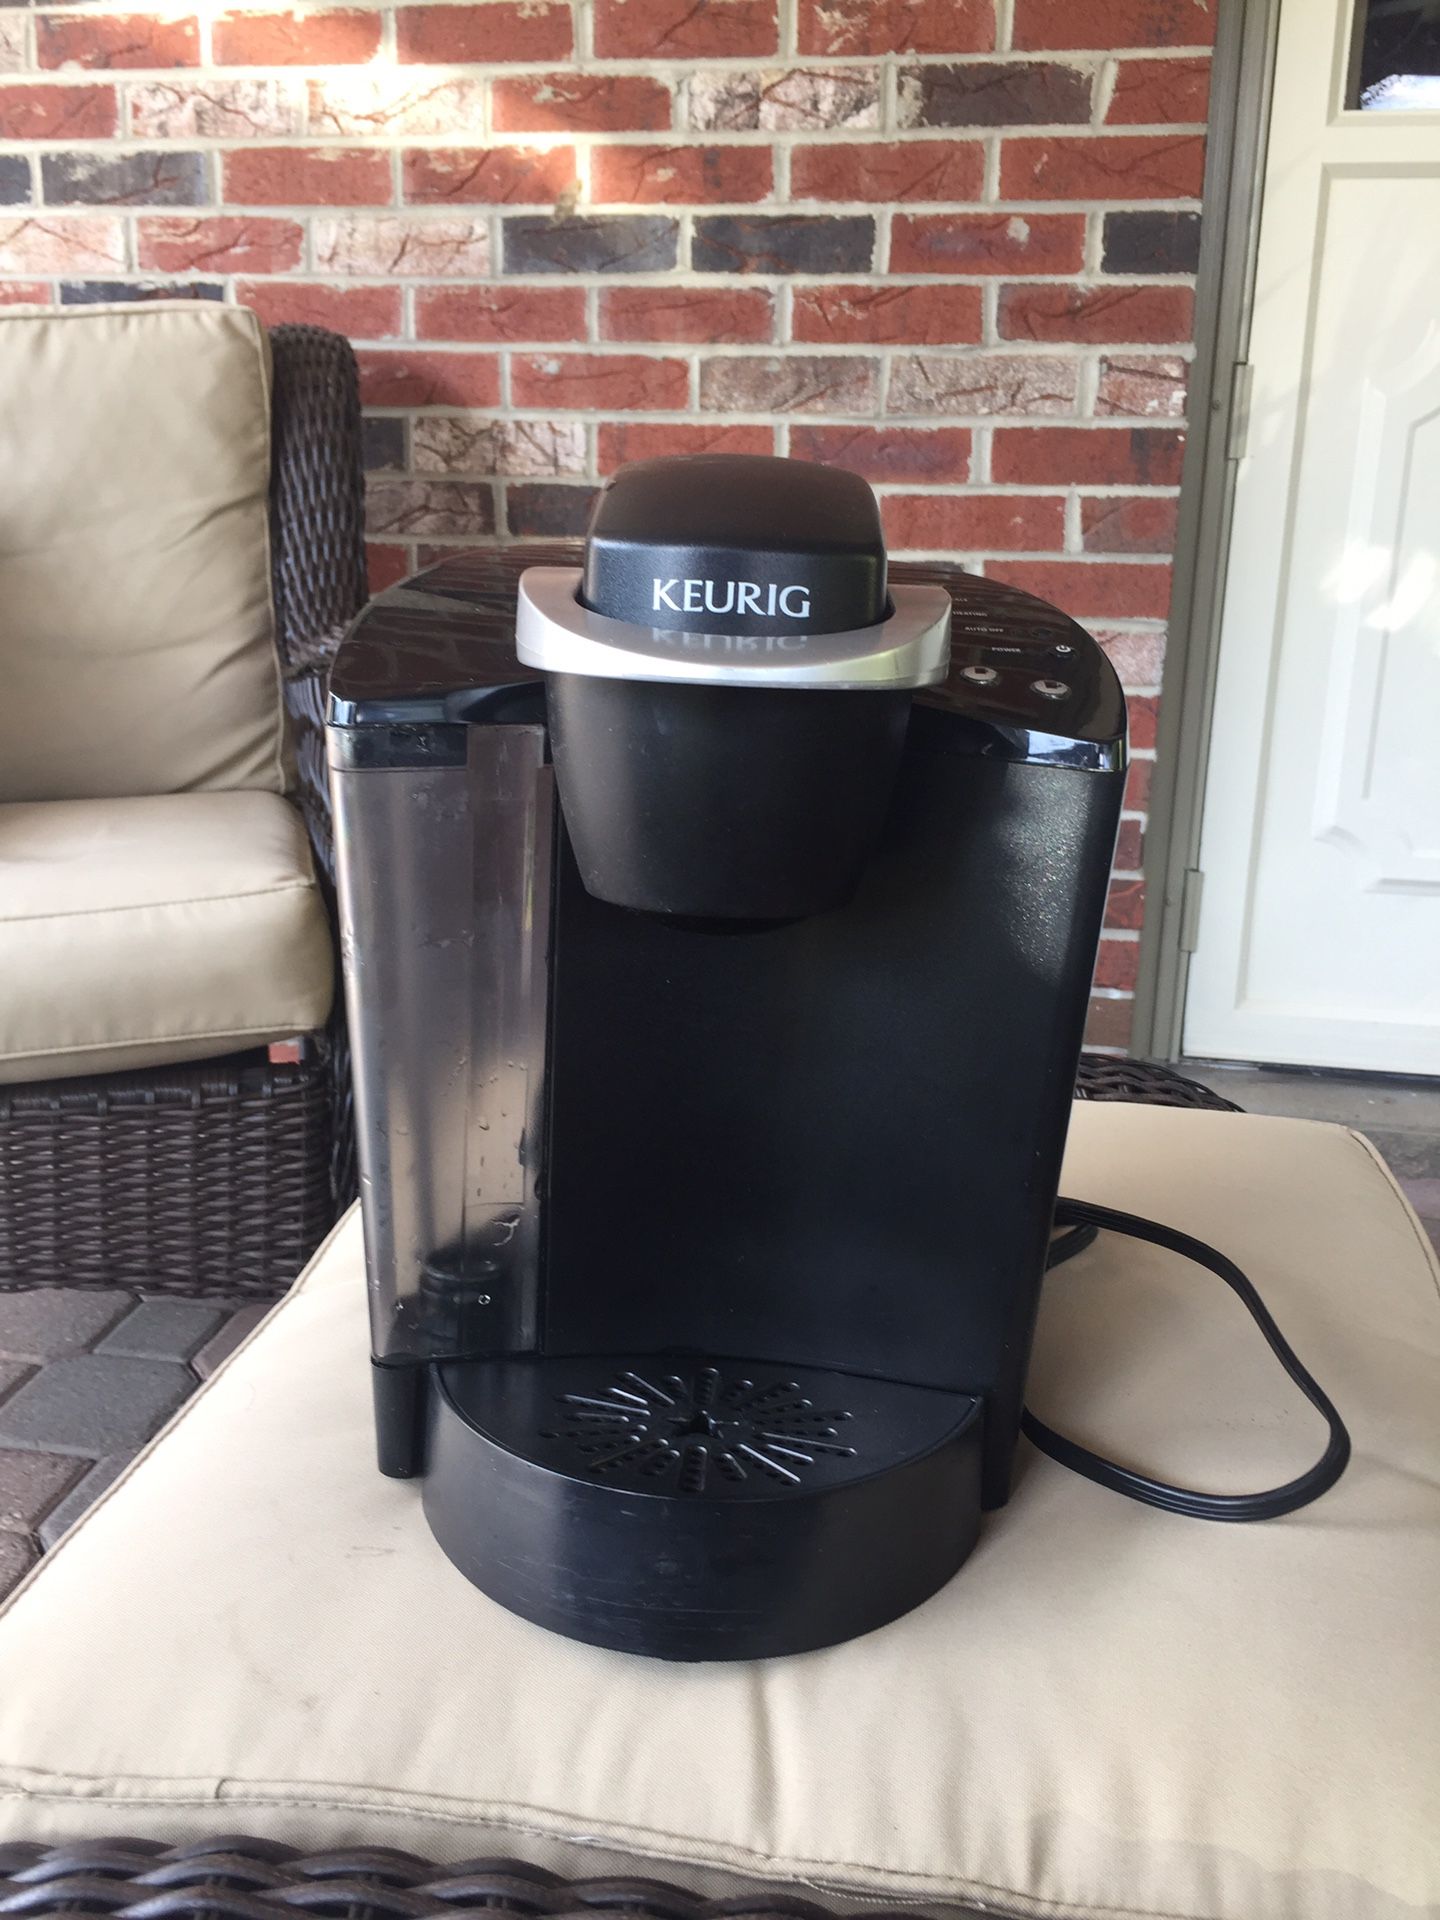 Keurig - great for college